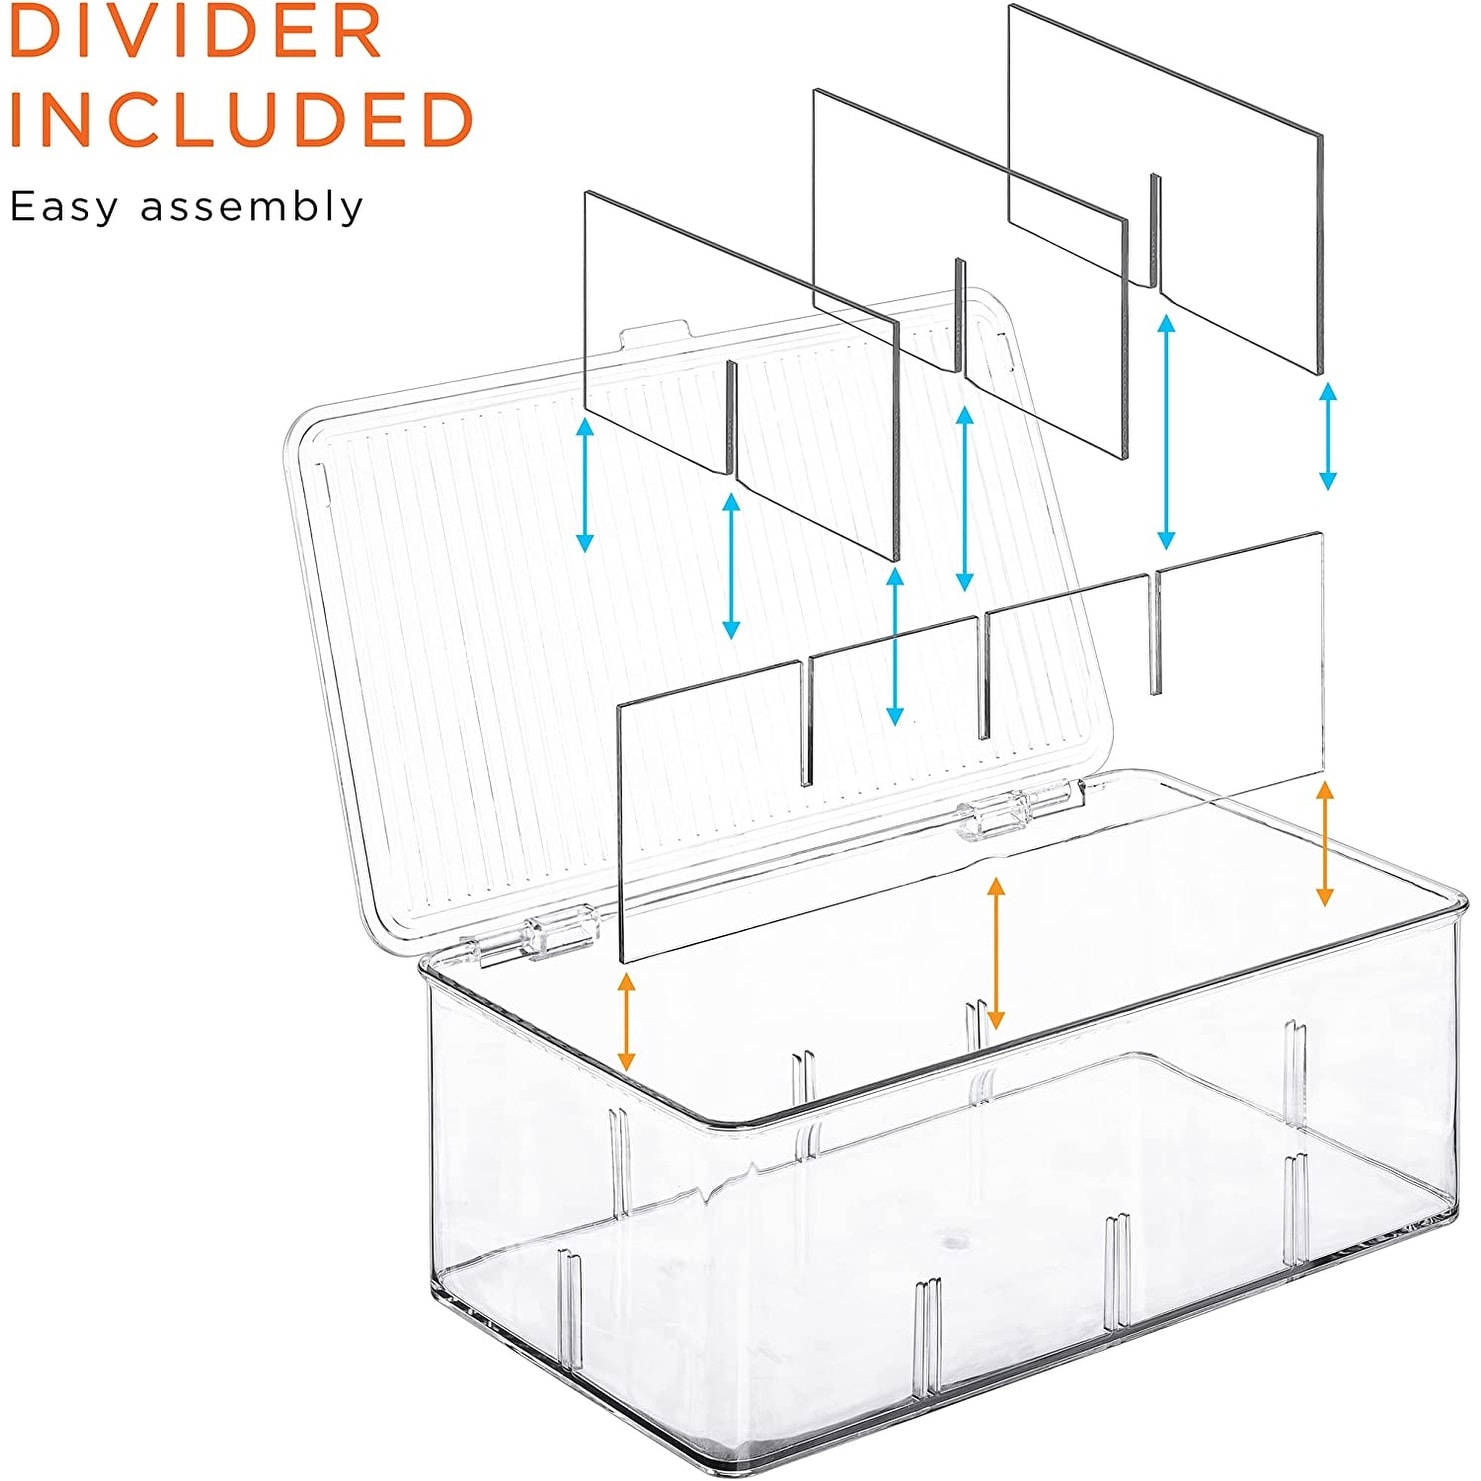 https://ak1.ostkcdn.com/images/products/is/images/direct/1efd8f16e27e1c6b5ac491fe497d998953213daa/Sorbus-Organizer-Bins%2C-with-lids-%26-Removable-Compartments%2C-Kitchen-Pantry-Organization-Storage-bins-with-Dividers.jpg